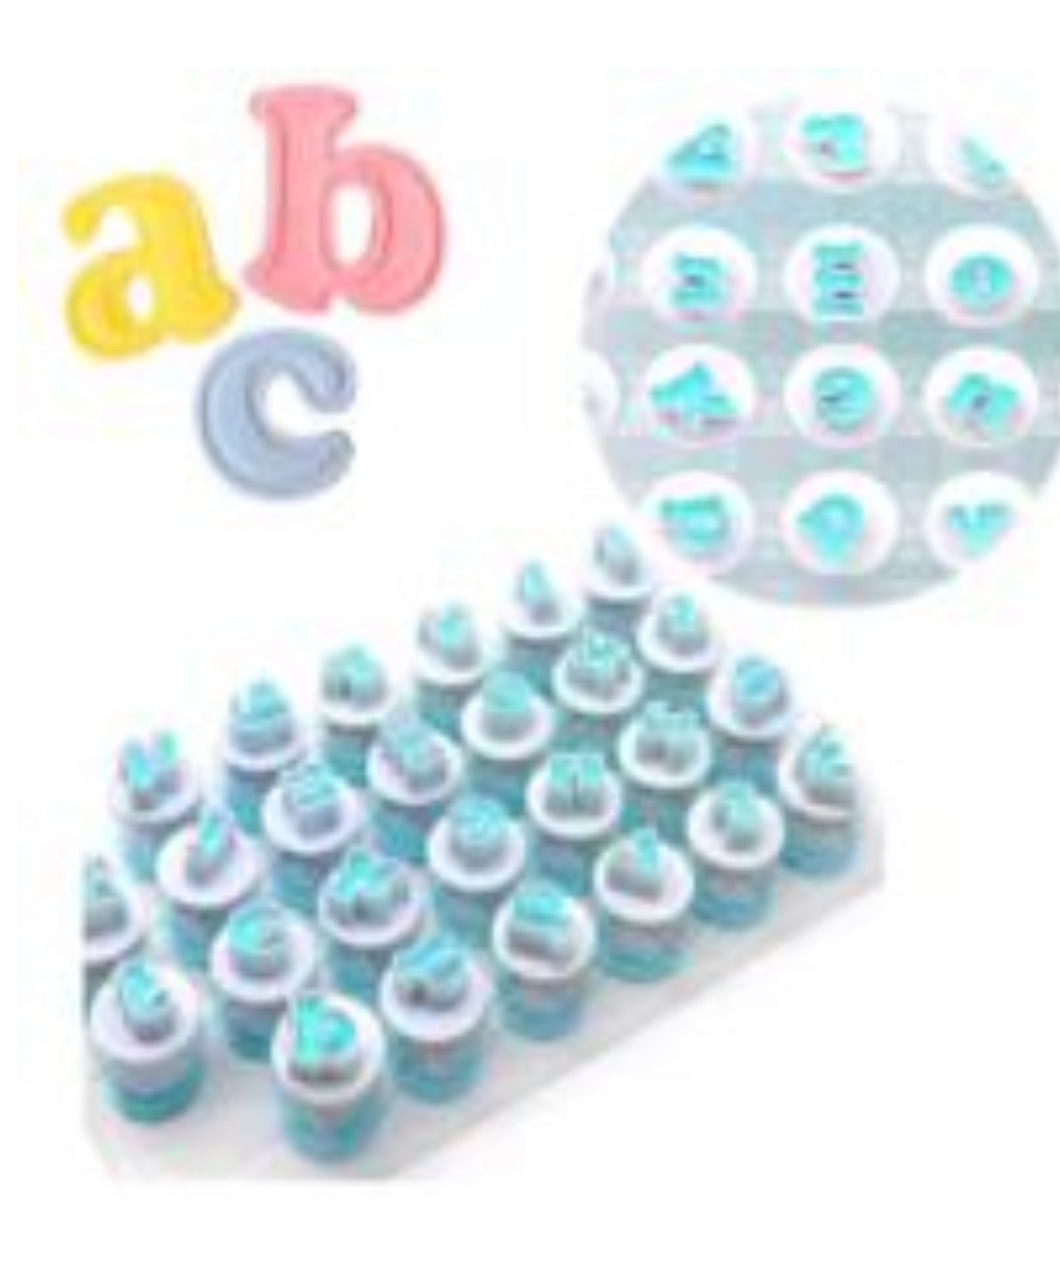 Font Lowercase Letters $10.99